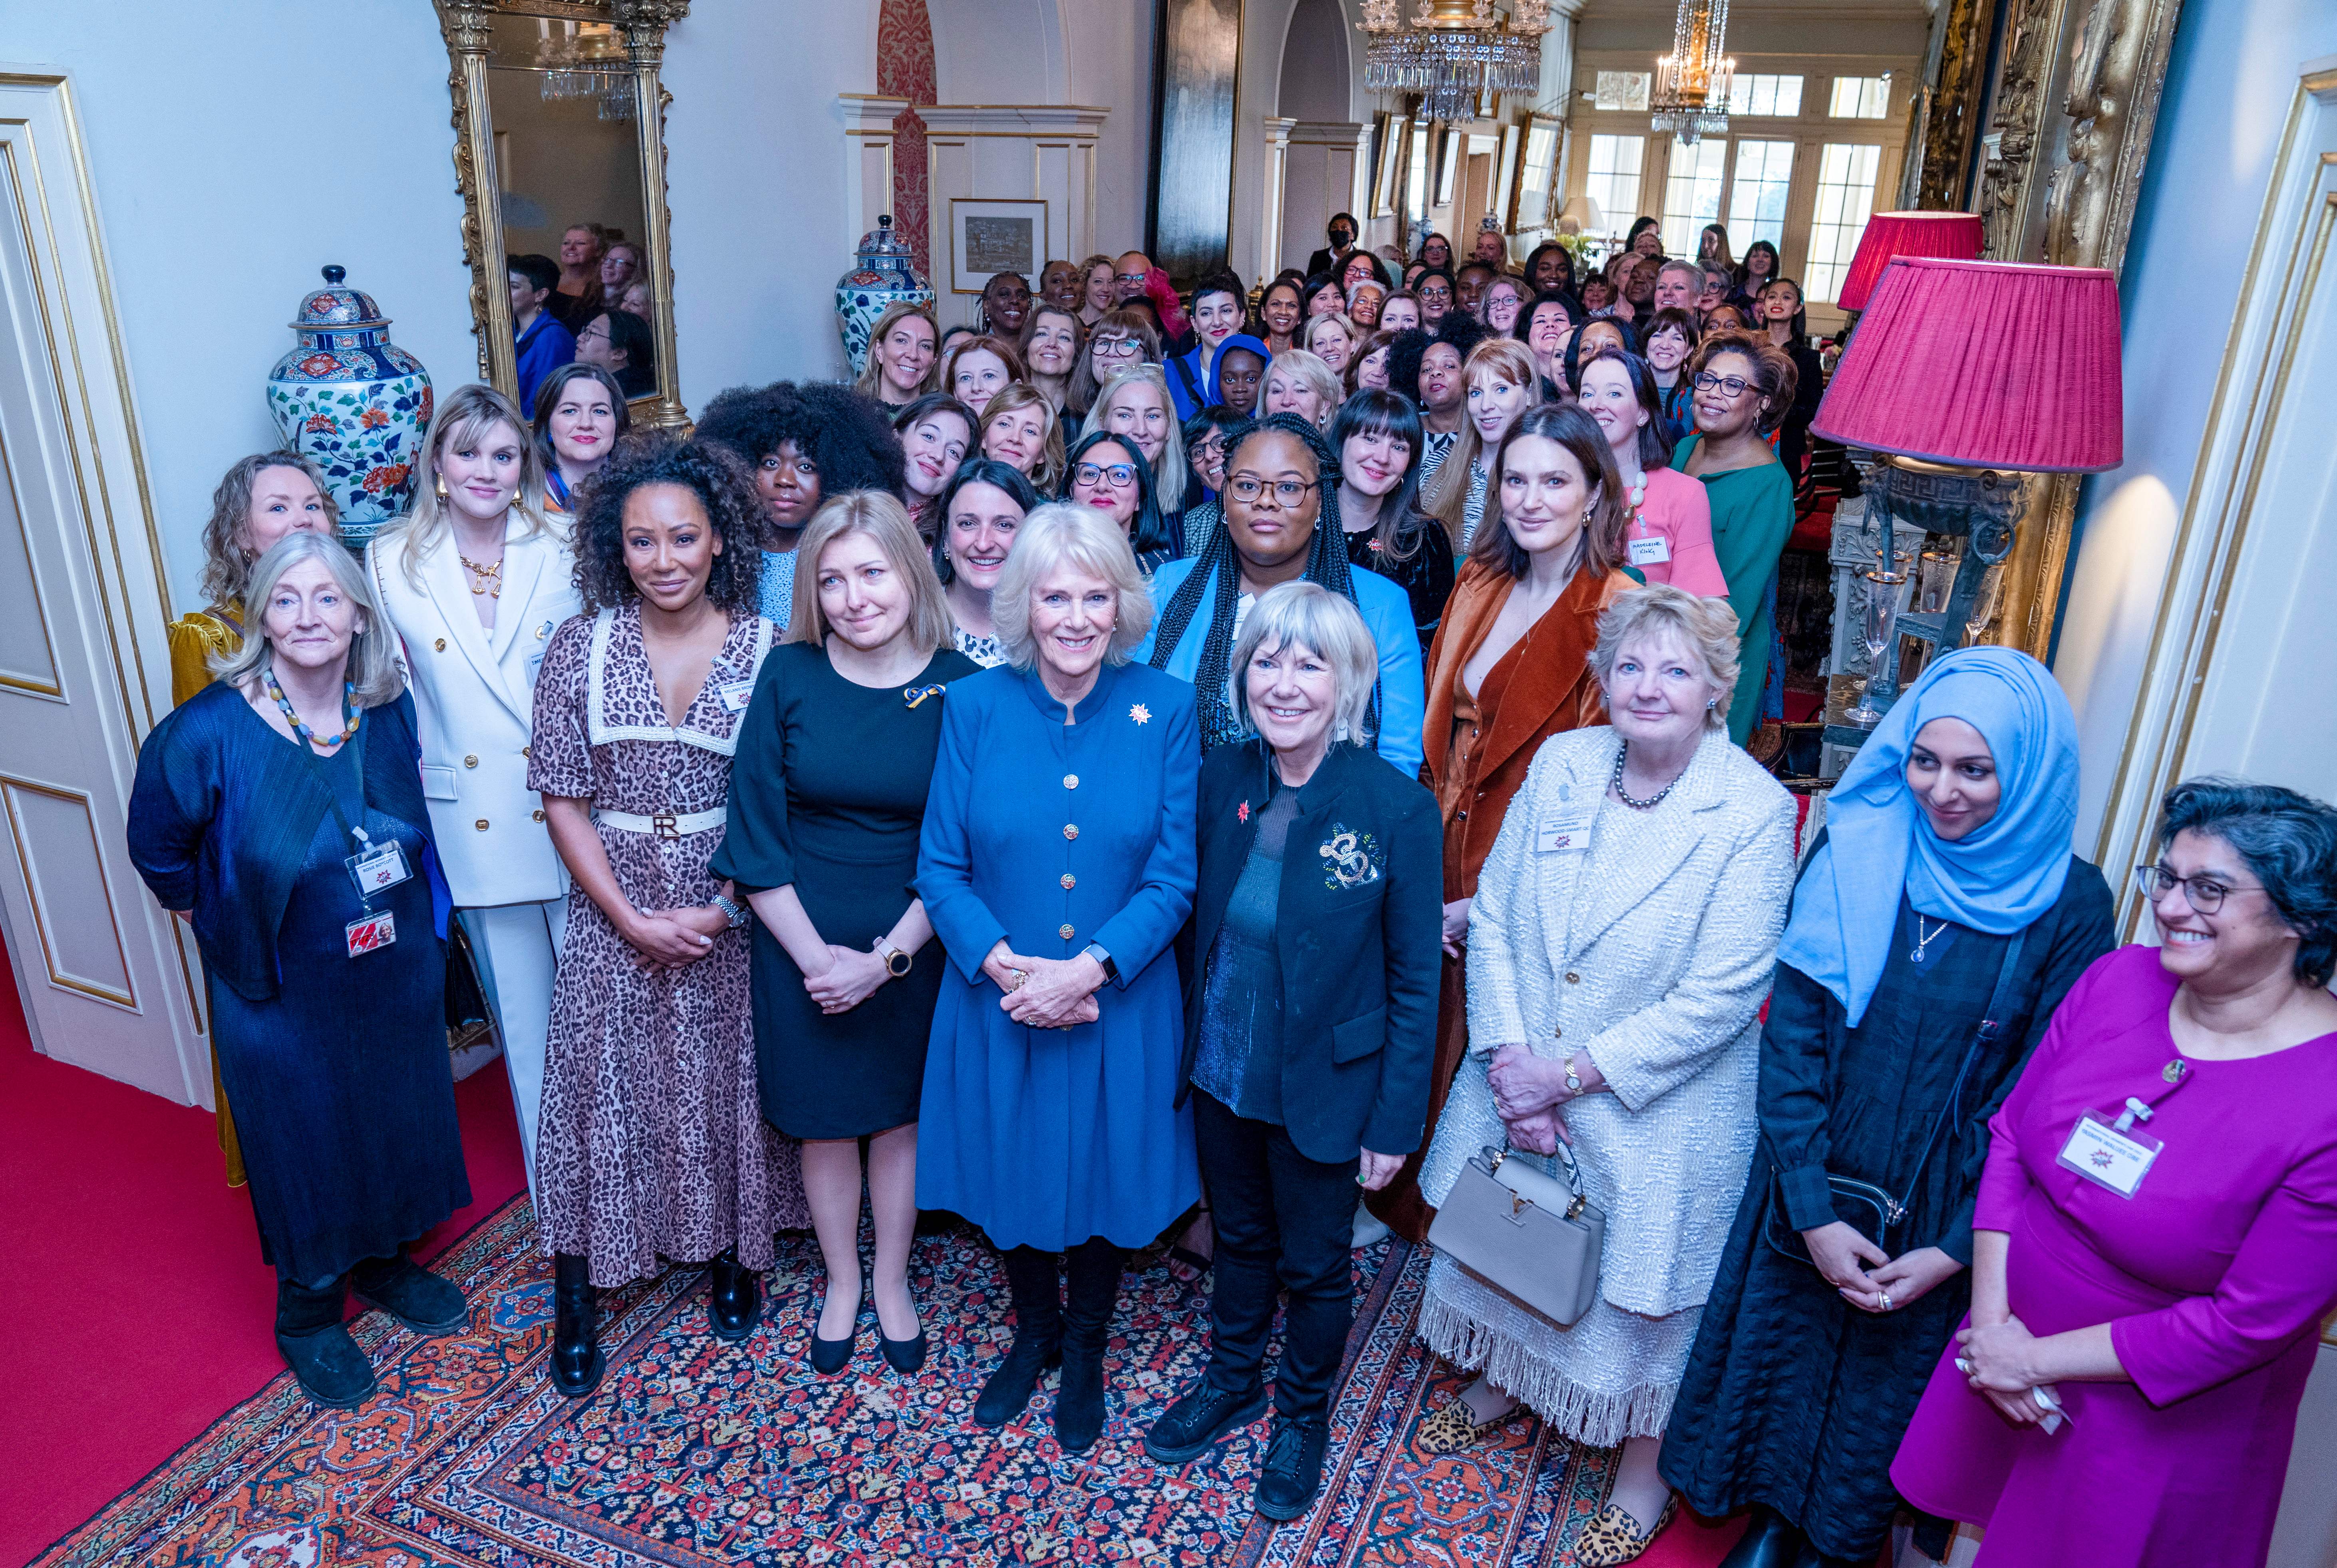 Queen Camilla poses for a group photo with attendees during a reception to mark International Women's Day at Clarence House, in London, on March 8, 2022 | Source: Getty Images